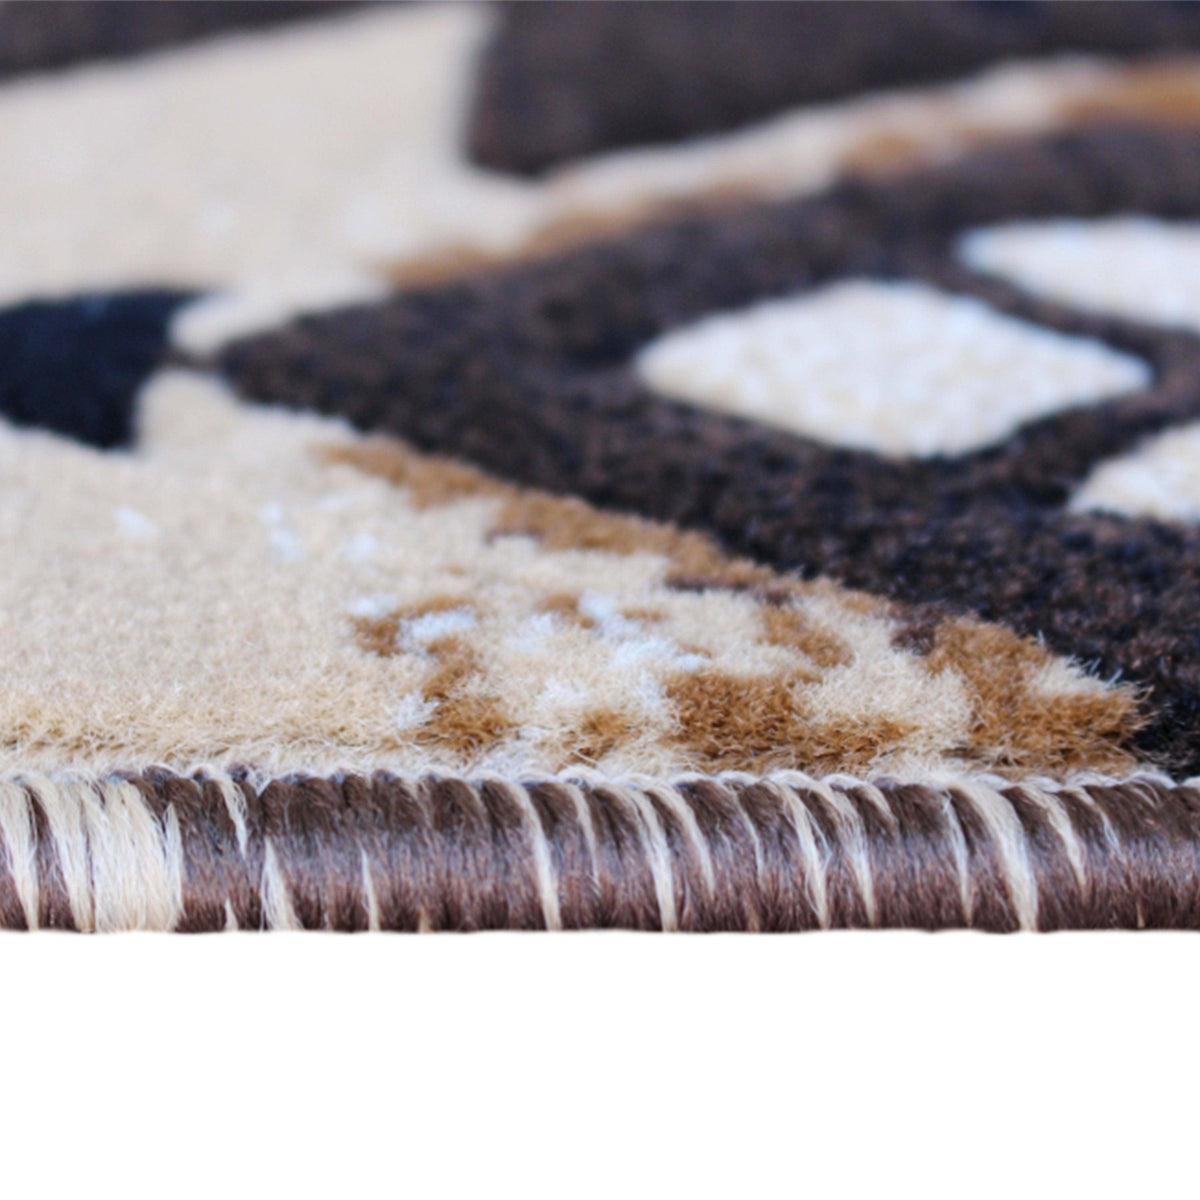 Brown,2' x 3' |#| Traditional Southwestern Style Brown Olefin Fiber Area Rug - 2' x 3'